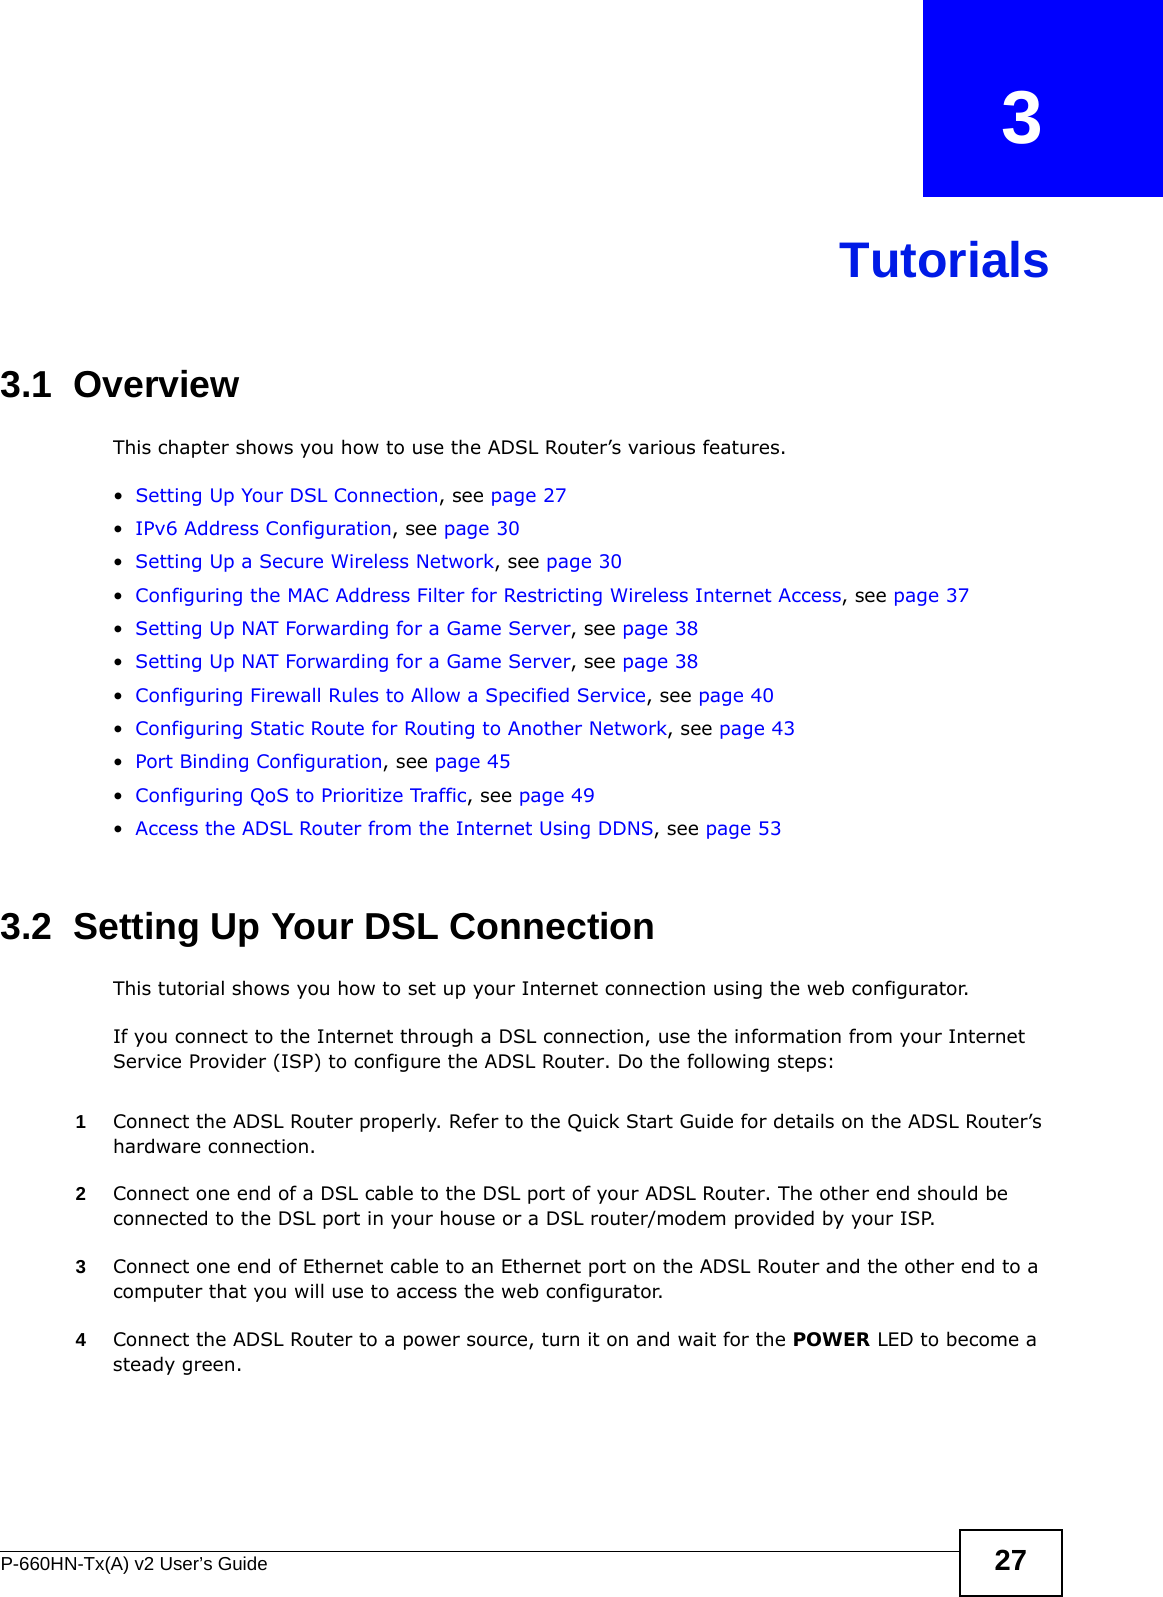 P-660HN-Tx(A) v2 User’s Guide 27CHAPTER   3Tutorials3.1  OverviewThis chapter shows you how to use the ADSL Router’s various features.•Setting Up Your DSL Connection, see page 27•IPv6 Address Configuration, see page 30•Setting Up a Secure Wireless Network, see page 30•Configuring the MAC Address Filter for Restricting Wireless Internet Access, see page 37•Setting Up NAT Forwarding for a Game Server, see page 38•Setting Up NAT Forwarding for a Game Server, see page 38•Configuring Firewall Rules to Allow a Specified Service, see page 40•Configuring Static Route for Routing to Another Network, see page 43•Port Binding Configuration, see page 45•Configuring QoS to Prioritize Traffic, see page 49•Access the ADSL Router from the Internet Using DDNS, see page 533.2  Setting Up Your DSL ConnectionThis tutorial shows you how to set up your Internet connection using the web configurator. If you connect to the Internet through a DSL connection, use the information from your Internet Service Provider (ISP) to configure the ADSL Router. Do the following steps:1Connect the ADSL Router properly. Refer to the Quick Start Guide for details on the ADSL Router’s hardware connection. 2Connect one end of a DSL cable to the DSL port of your ADSL Router. The other end should be connected to the DSL port in your house or a DSL router/modem provided by your ISP.3Connect one end of Ethernet cable to an Ethernet port on the ADSL Router and the other end to a computer that you will use to access the web configurator.4Connect the ADSL Router to a power source, turn it on and wait for the POWER LED to become a steady green.